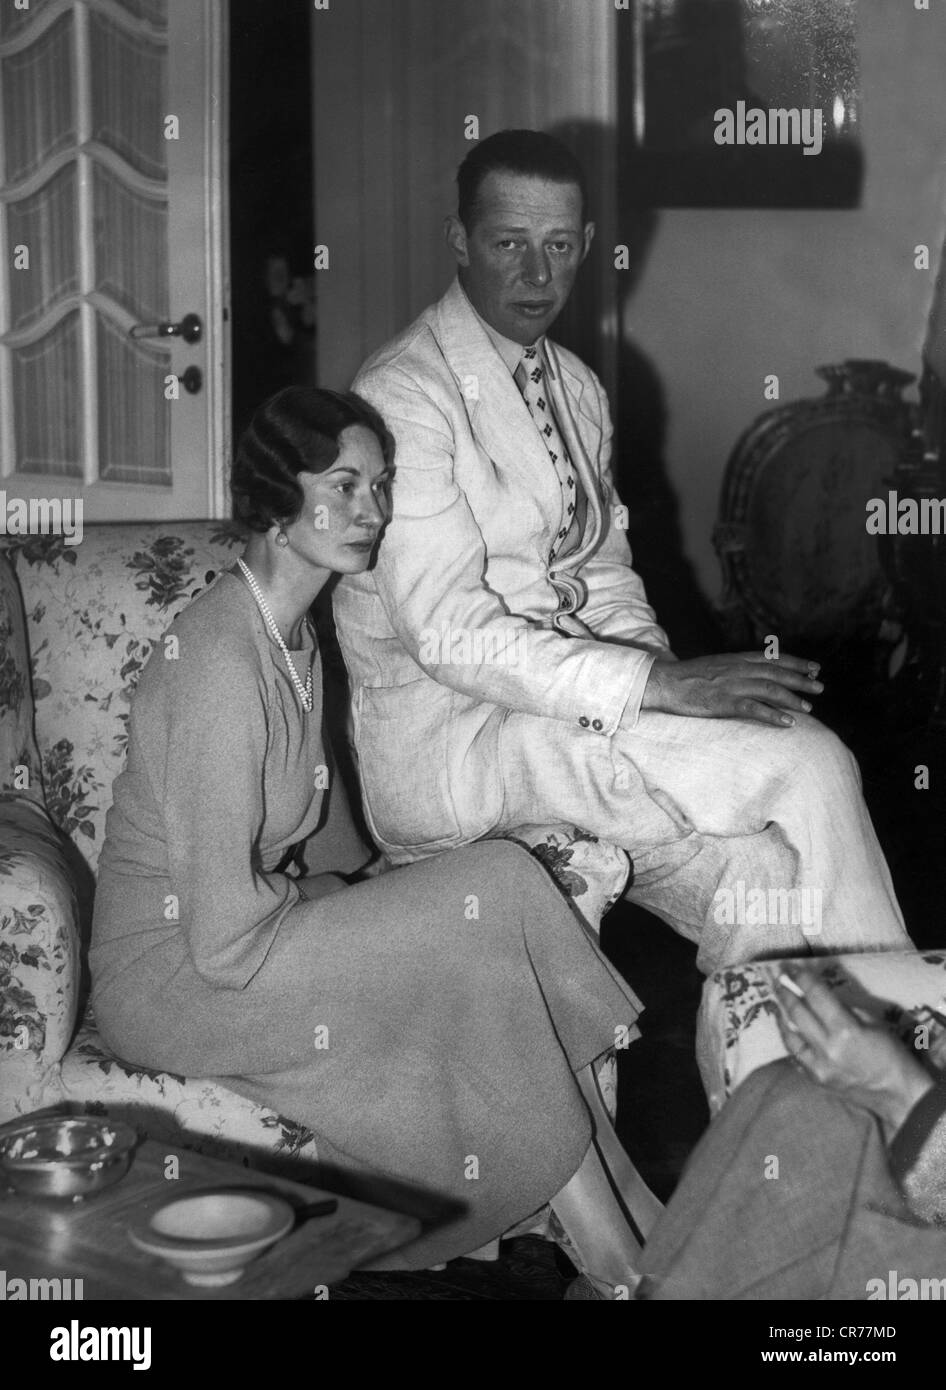 Christian, 20.2.1898 - 13.7.1974, prince of Schaumburg-Lippe, with fiance princess Feodora of Denmark shortly before the marriage, Fredensborg, 6.9.1937, Stock Photo